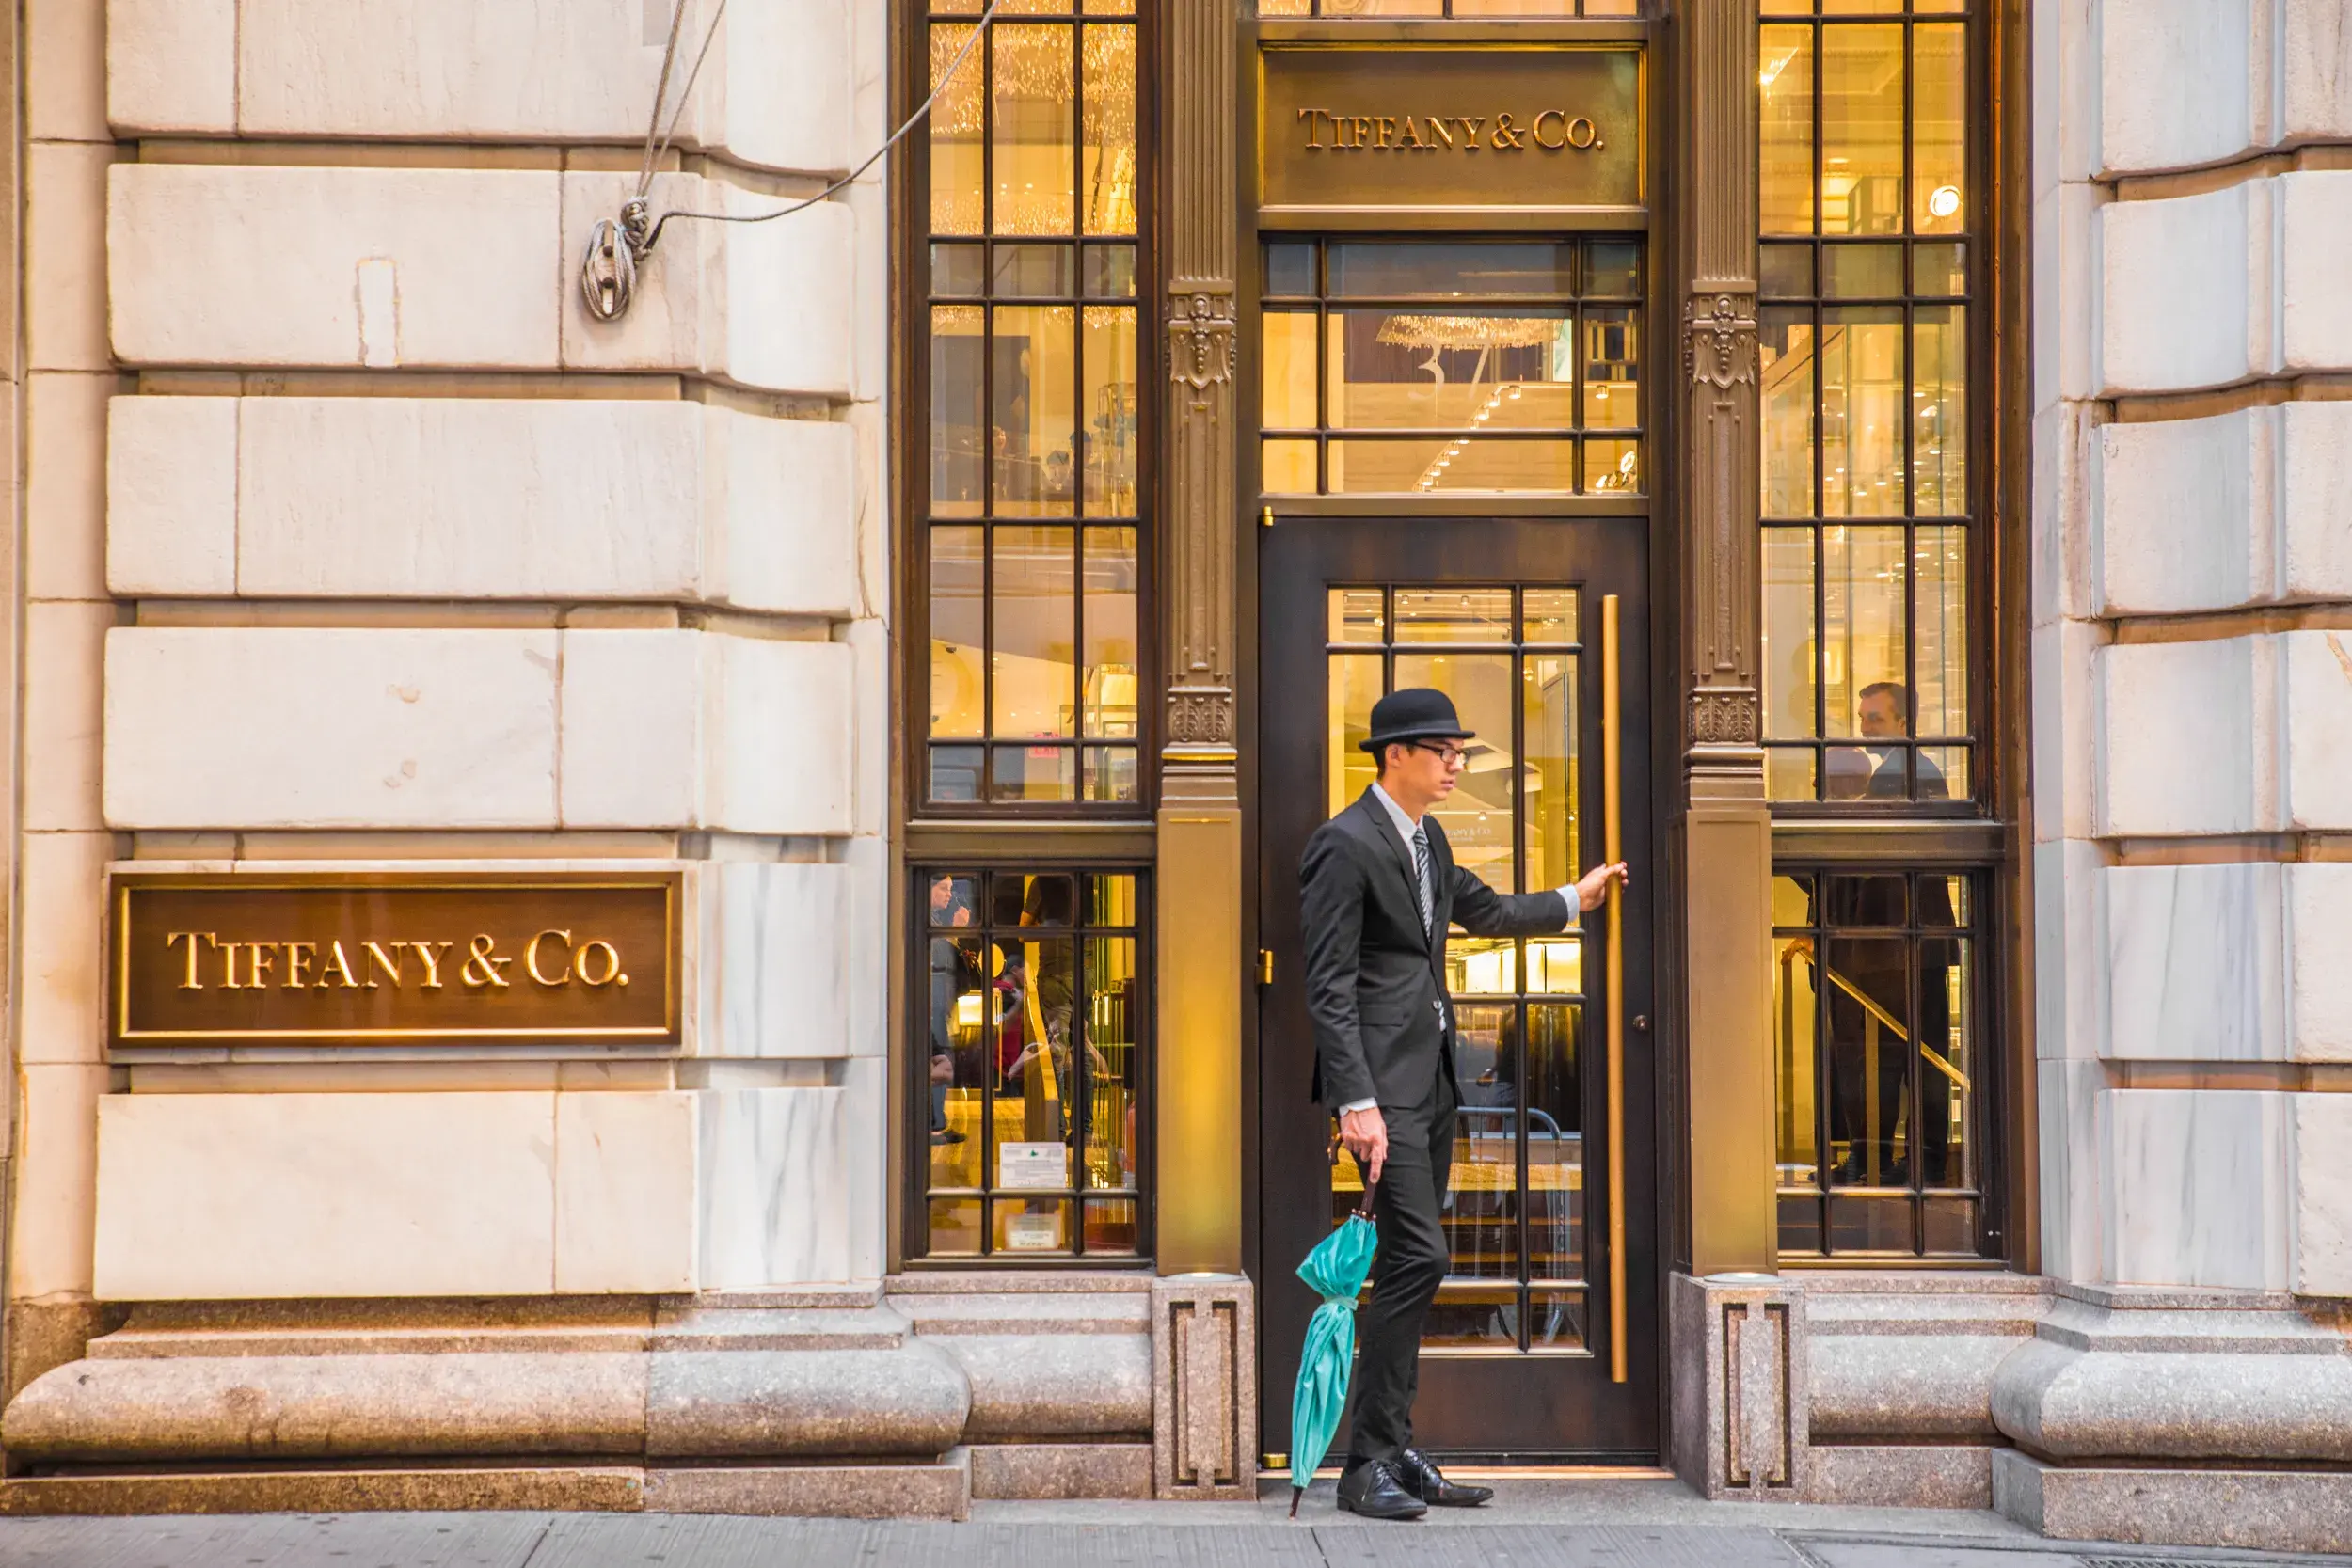 NEW YORK CITY - SEPTEMBER 17, 2016 - Exterior view of Tiffany & Co. on Wall Street in Manhattan.